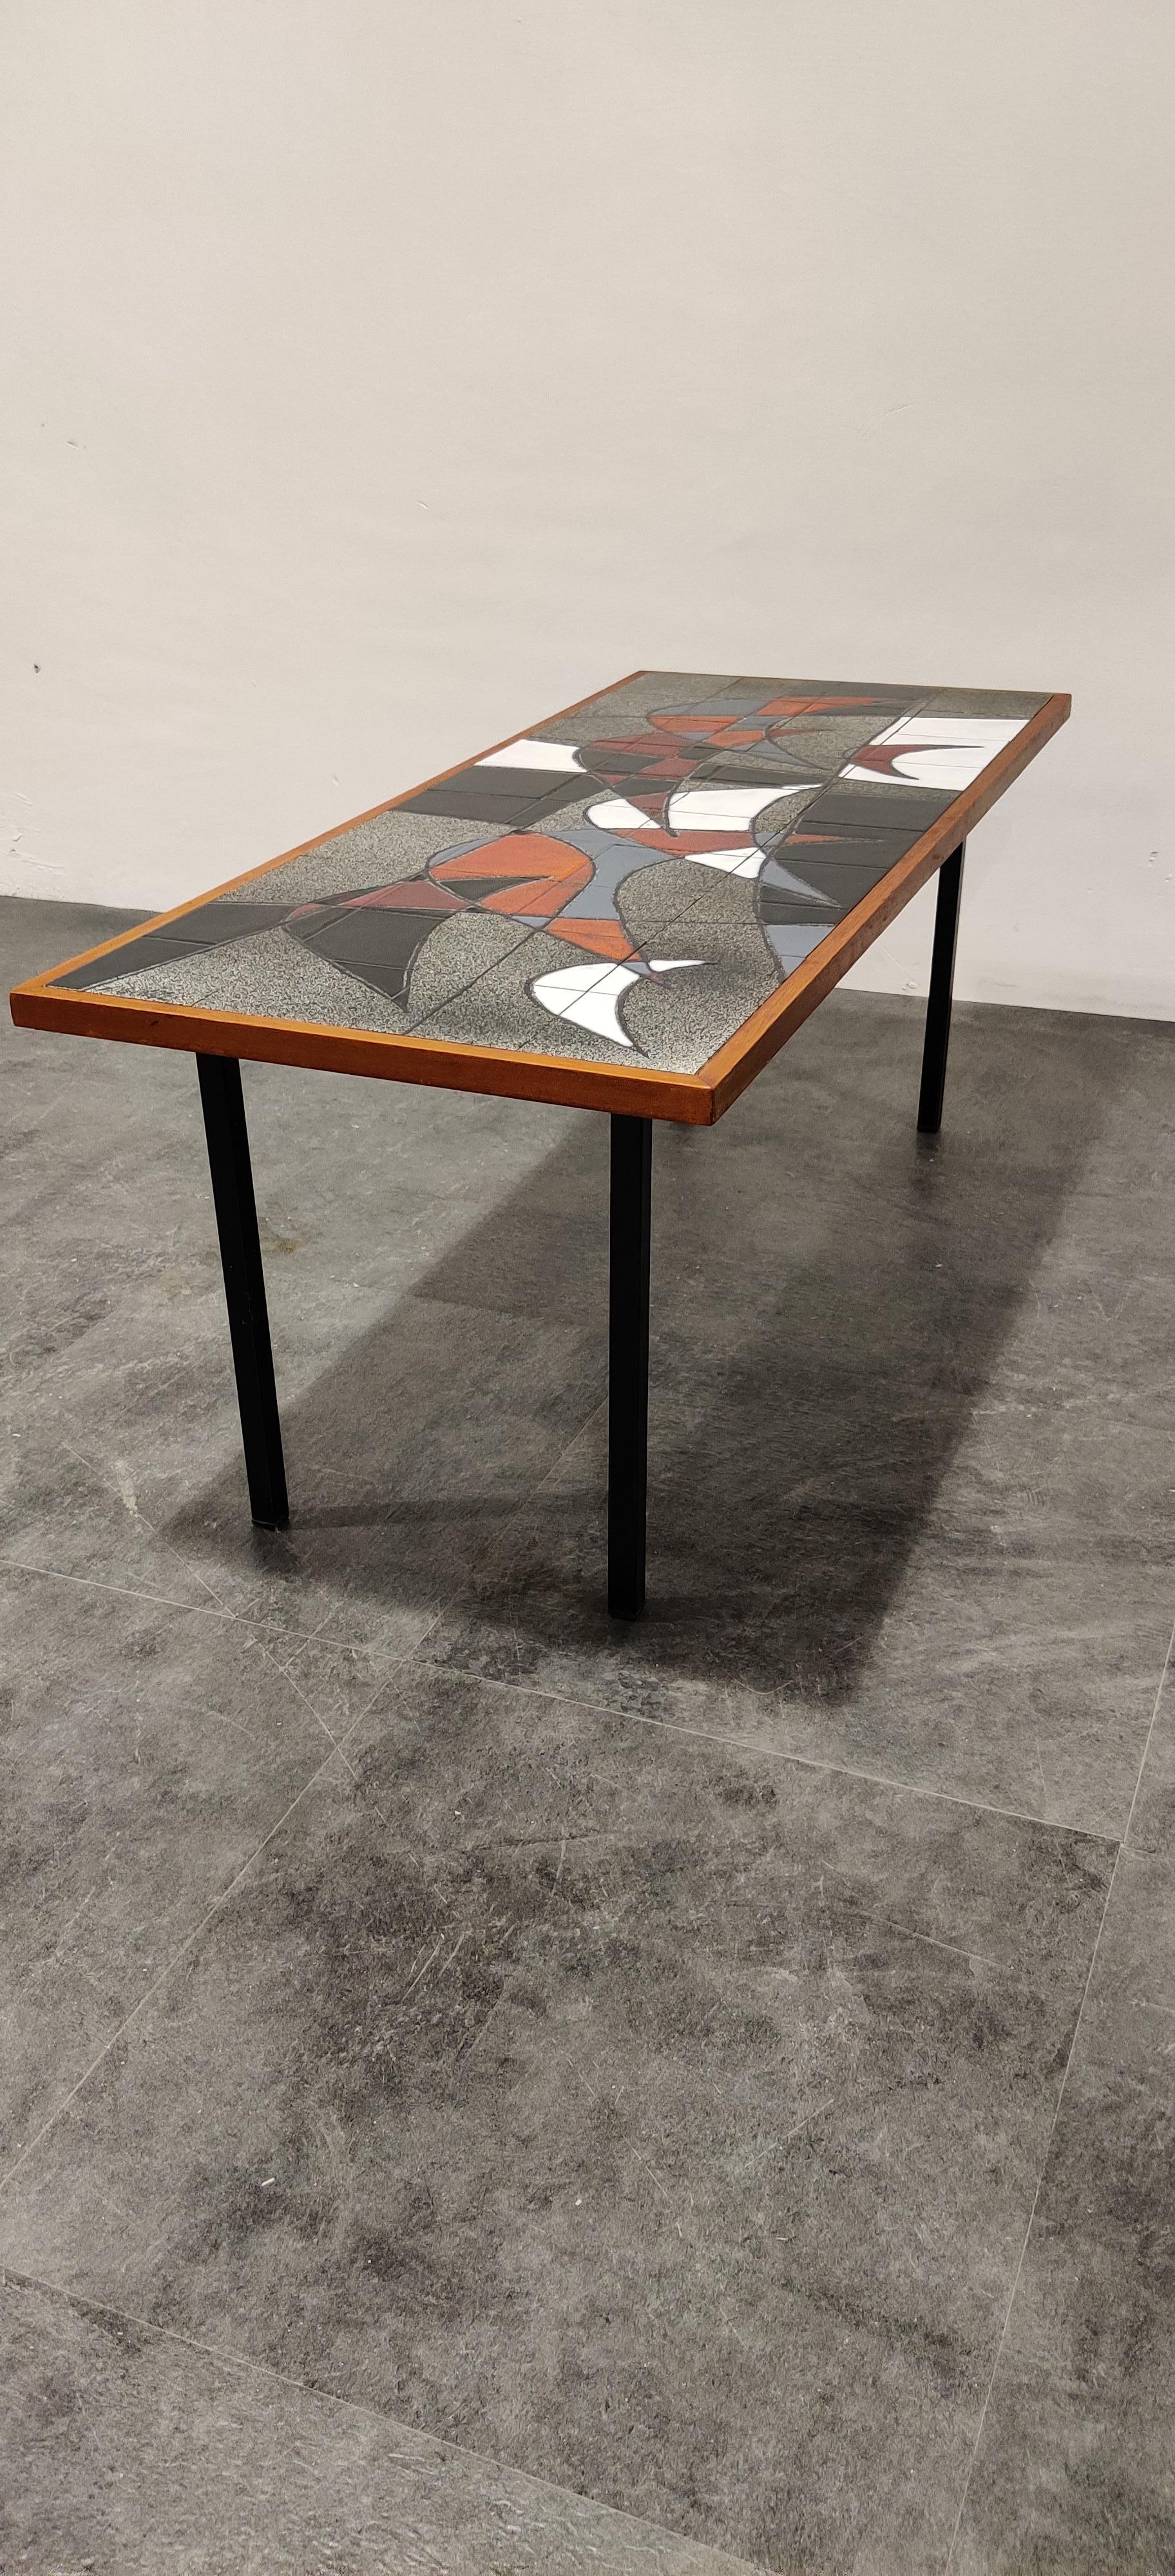 Stricking midcentury coffee table with a ceramic tiled top and a metal frame.

The table is signed by Vigneron.

Attractive colors and design.

Good condition.

1960s, Belgium

Good condition, minimal wear on the